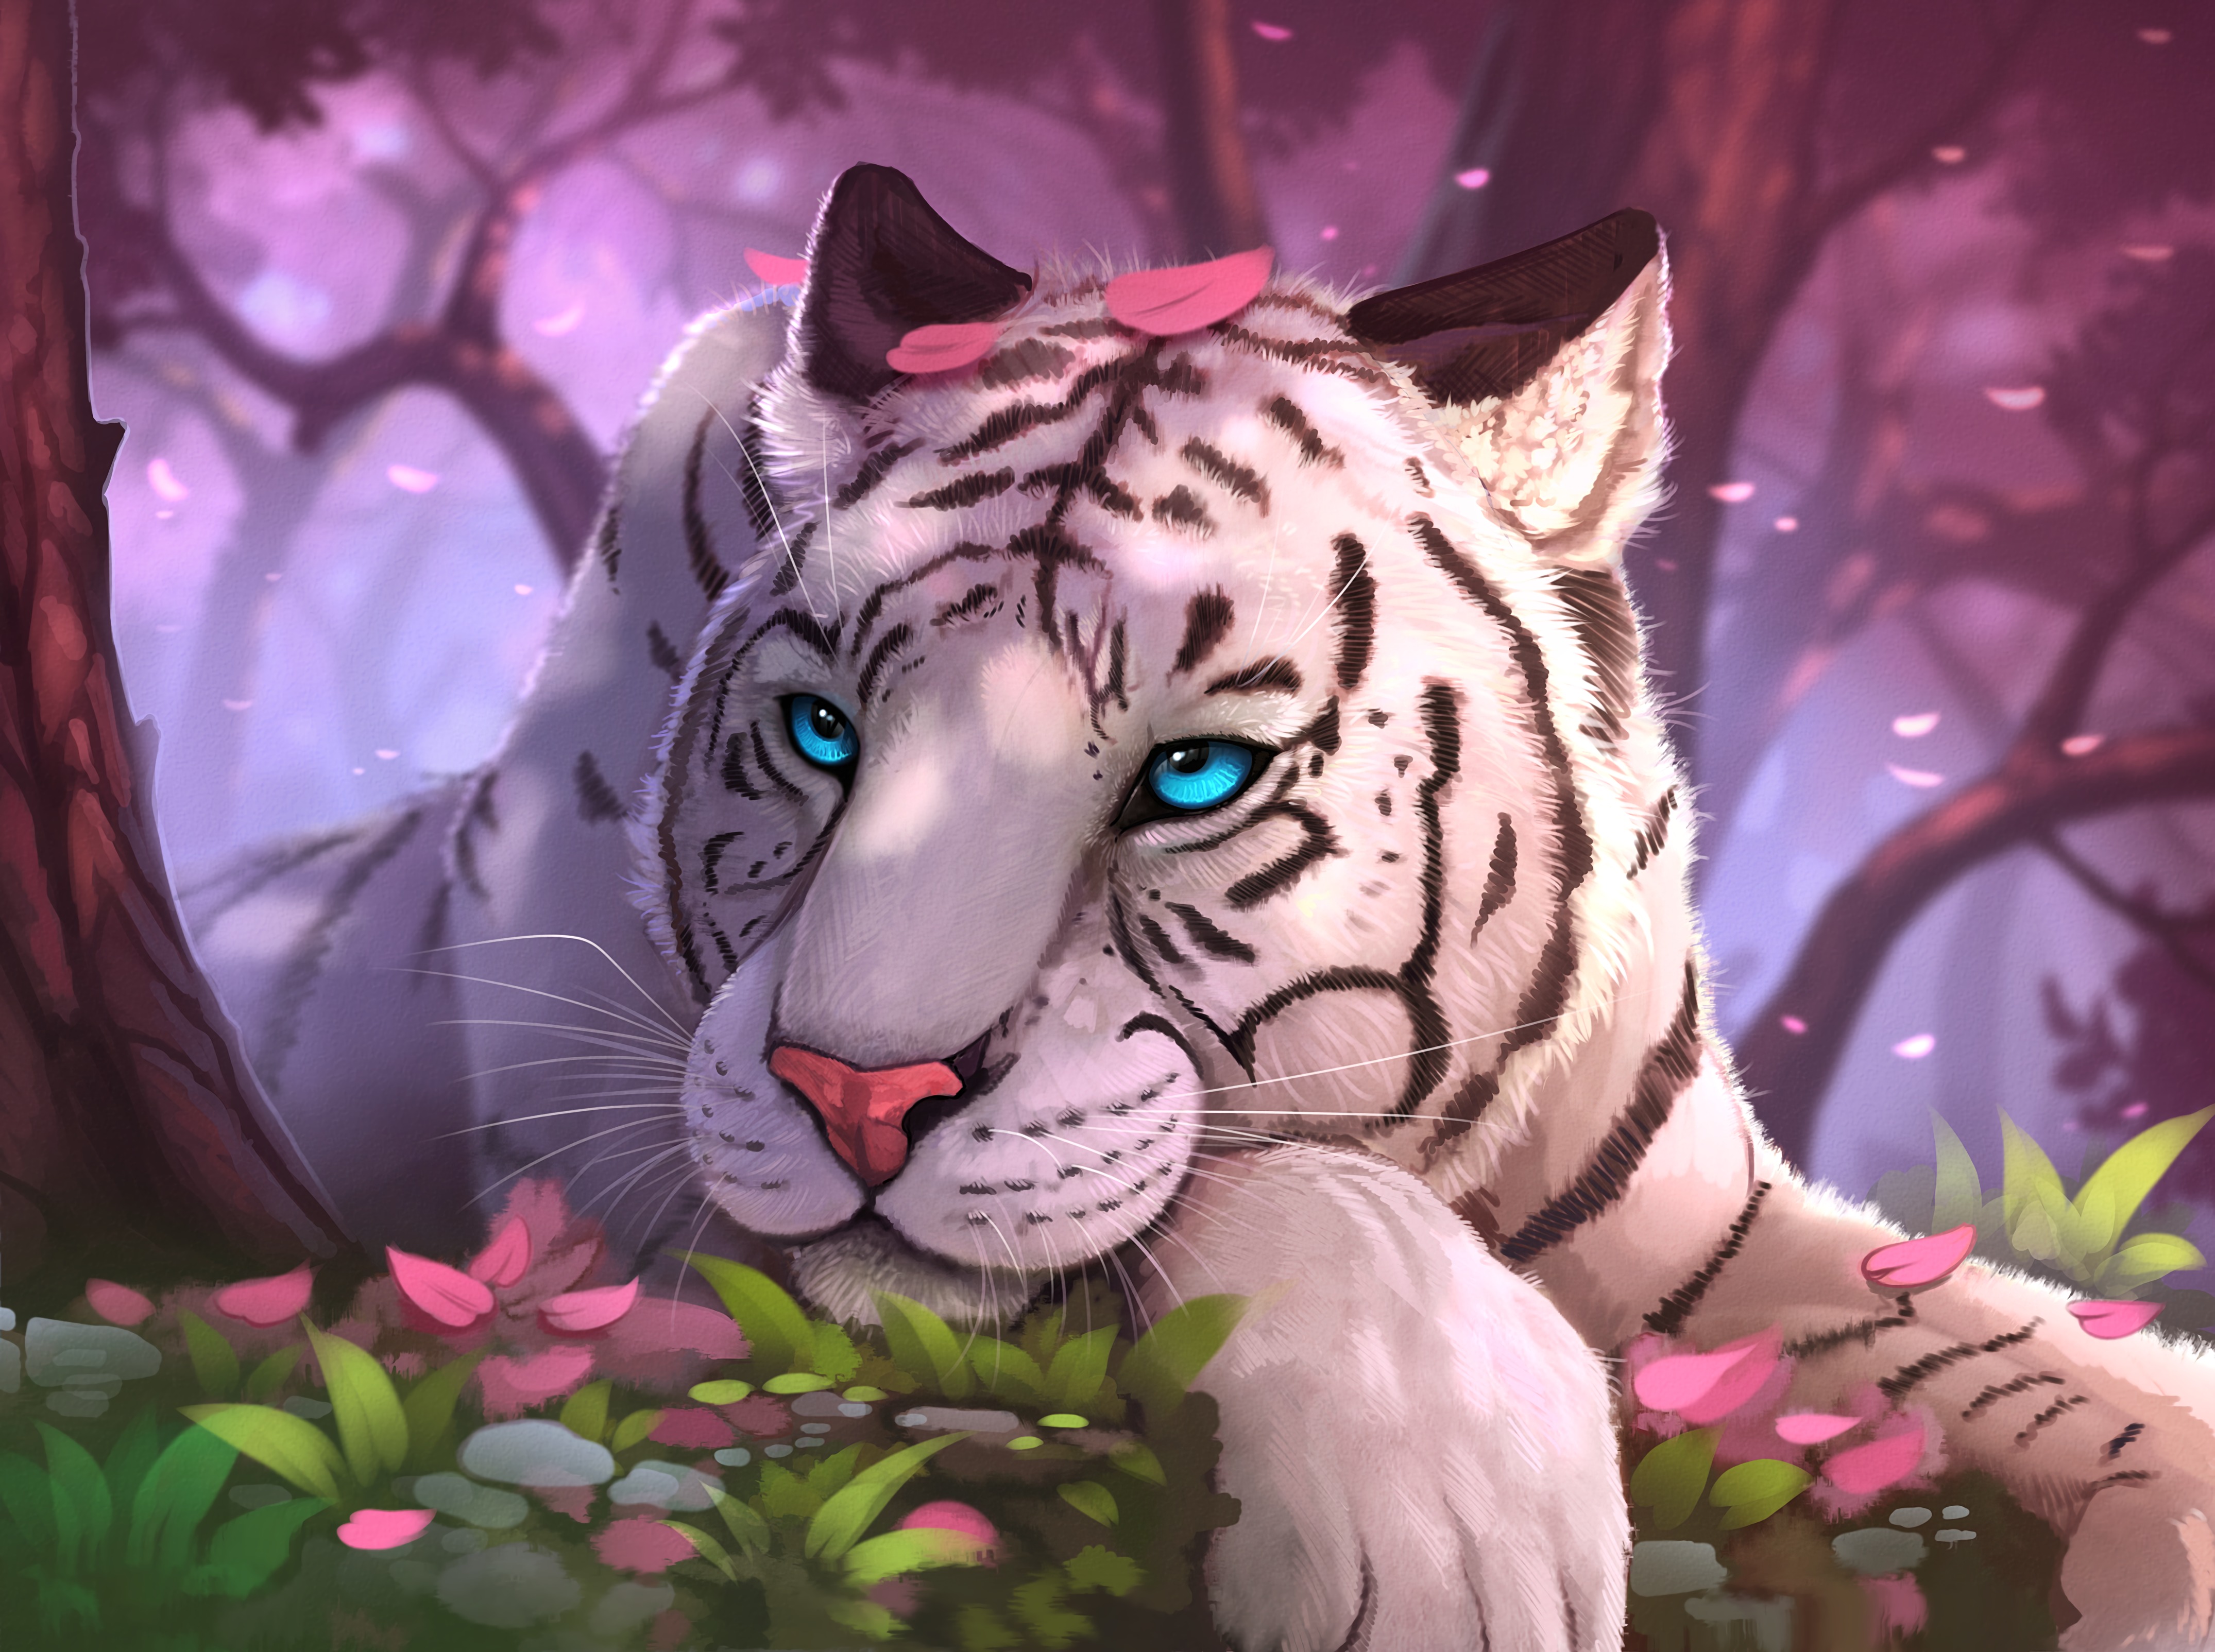 1080p pic art, opinion, tiger, blue-eyed